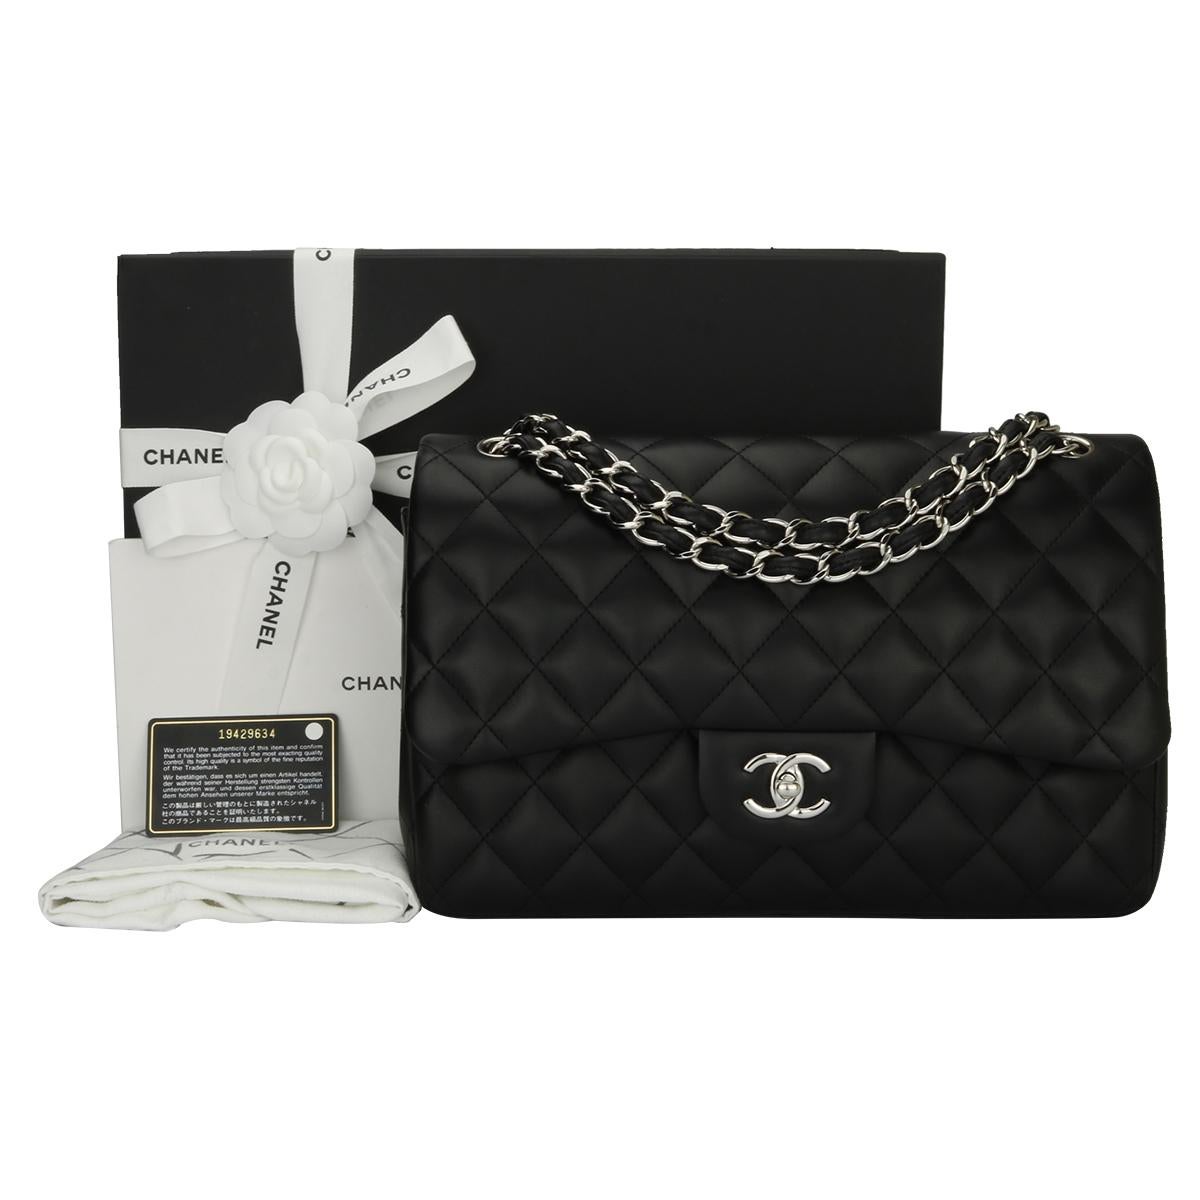 Authentic CHANEL Classic Jumbo Double Flap Black Lambskin with Silver Hardware 2014.

This stunning bag is in a mint condition, the bag still holds its original shape, and the hardware is still very shiny. Leather smells fresh as if new.

Exterior